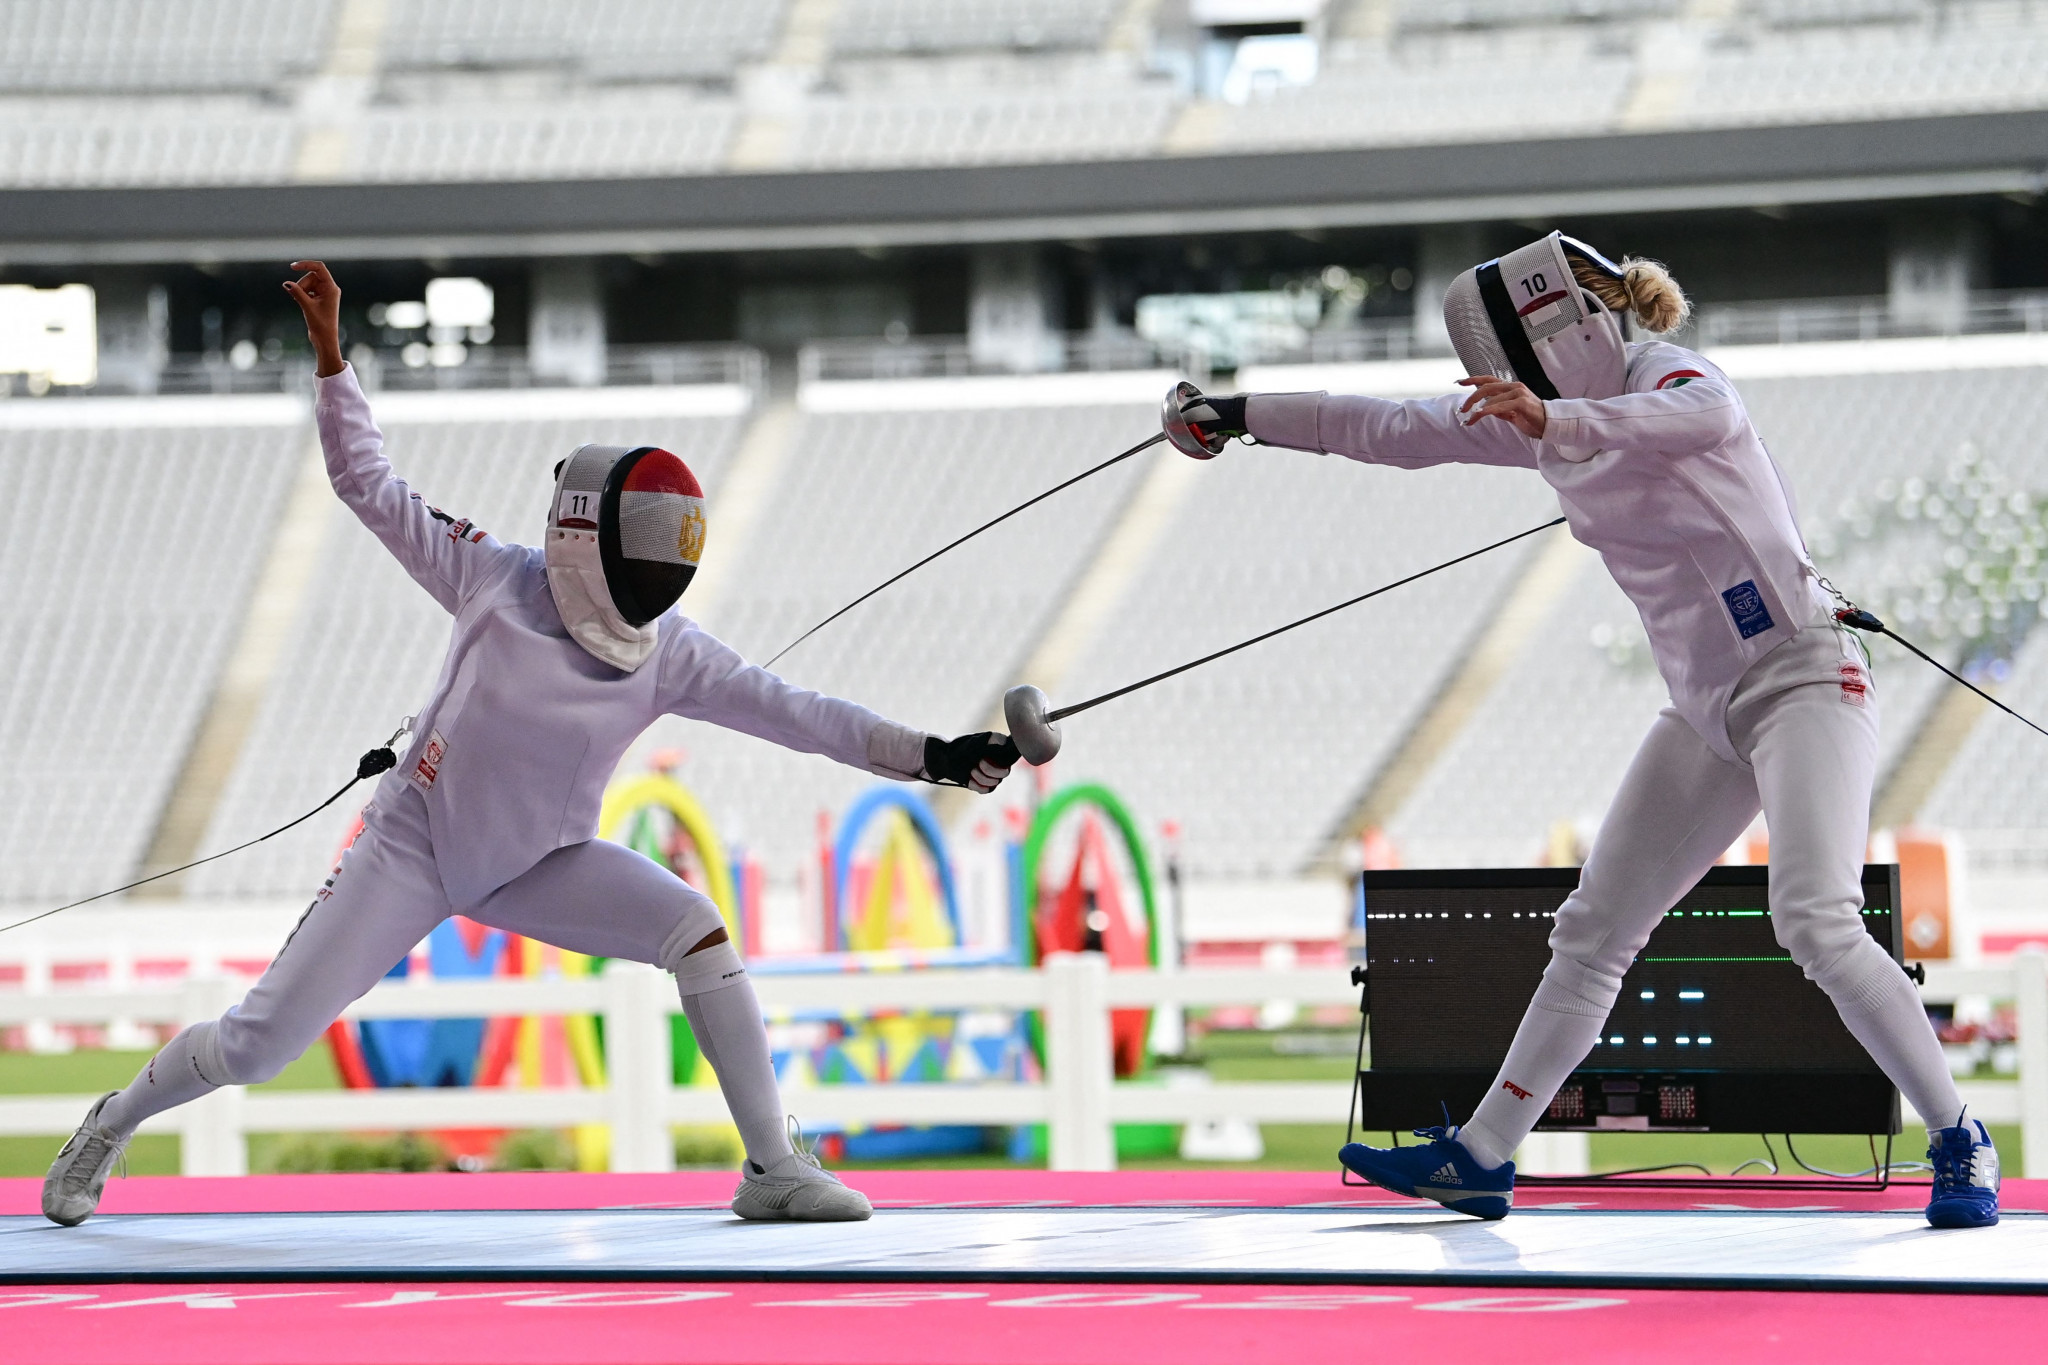 ANOCA has vowed to provide equipment, technical support and training assistance in modern pentathlon across Africa ©Getty Images